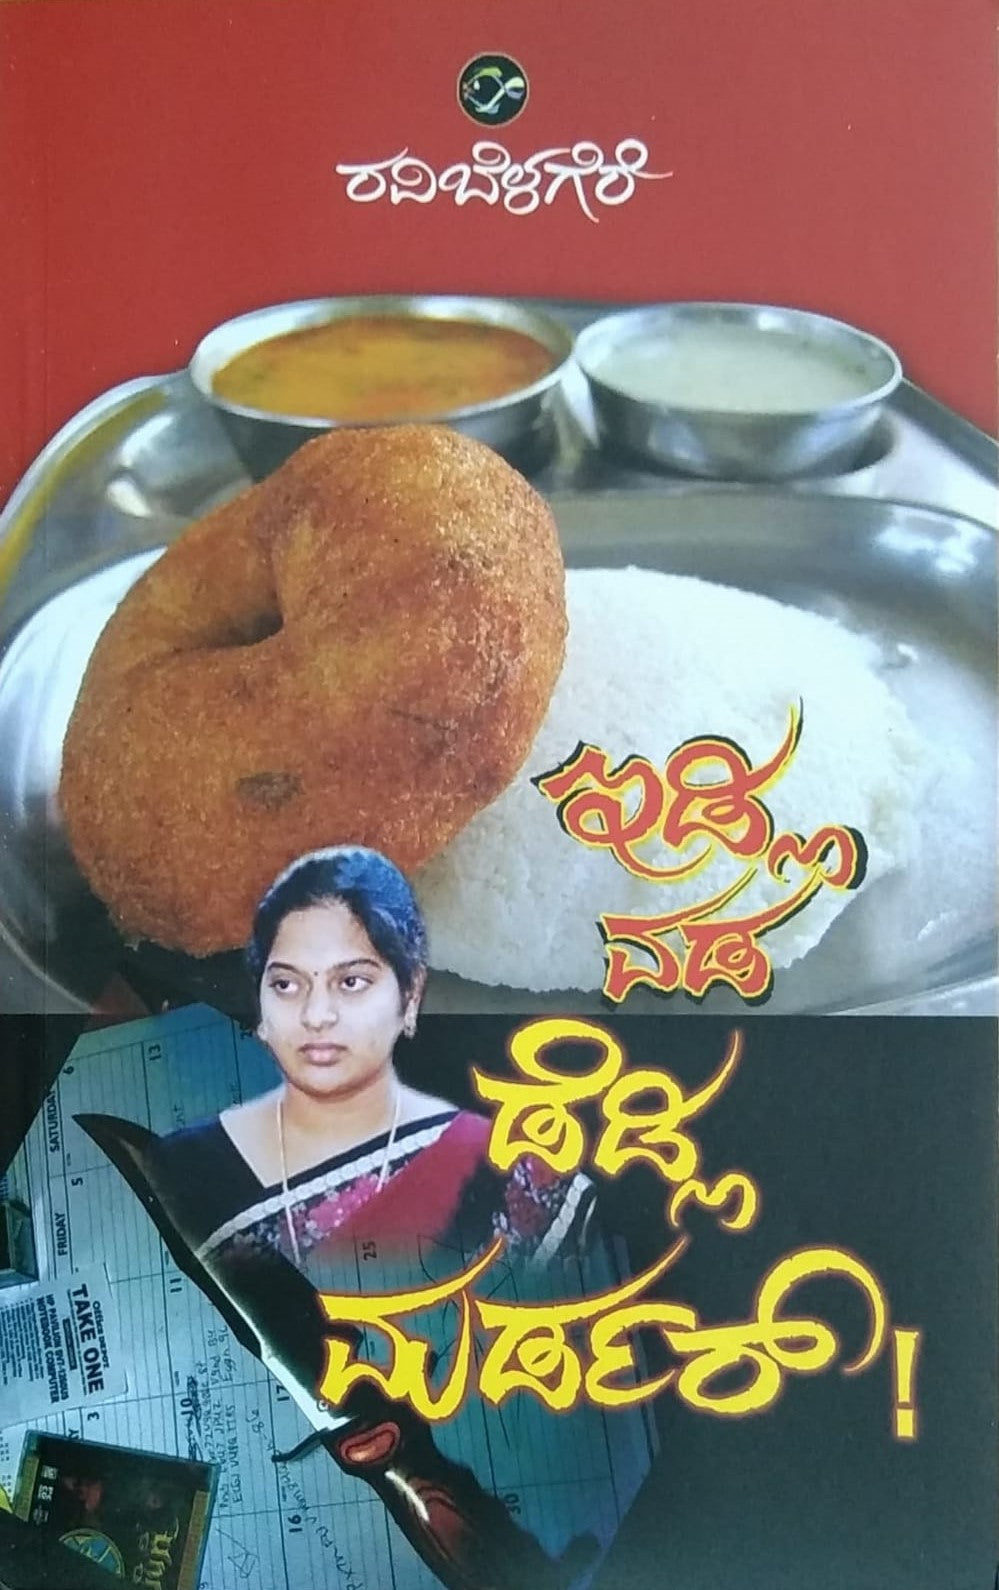 Idli Vada Deadly Murder is a real Story of a Prince Shanthakumar Murder which is Written by Ravi Belagere and Published by Bhavana Prakashana